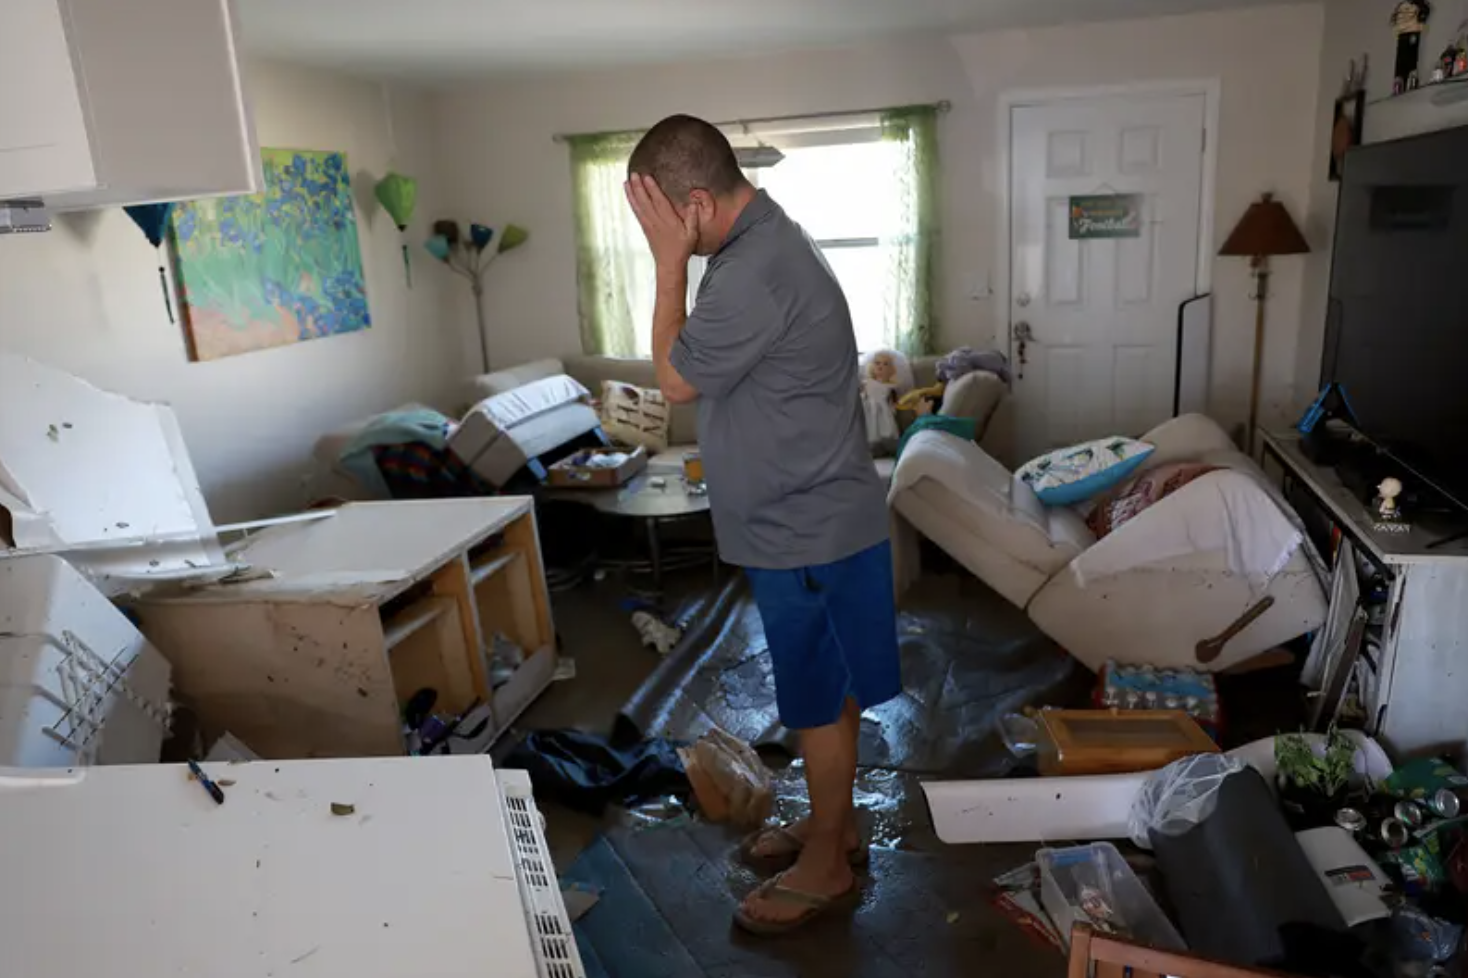 a man covers his face in emotion and stands in a room of his destroyed belongings after a storm